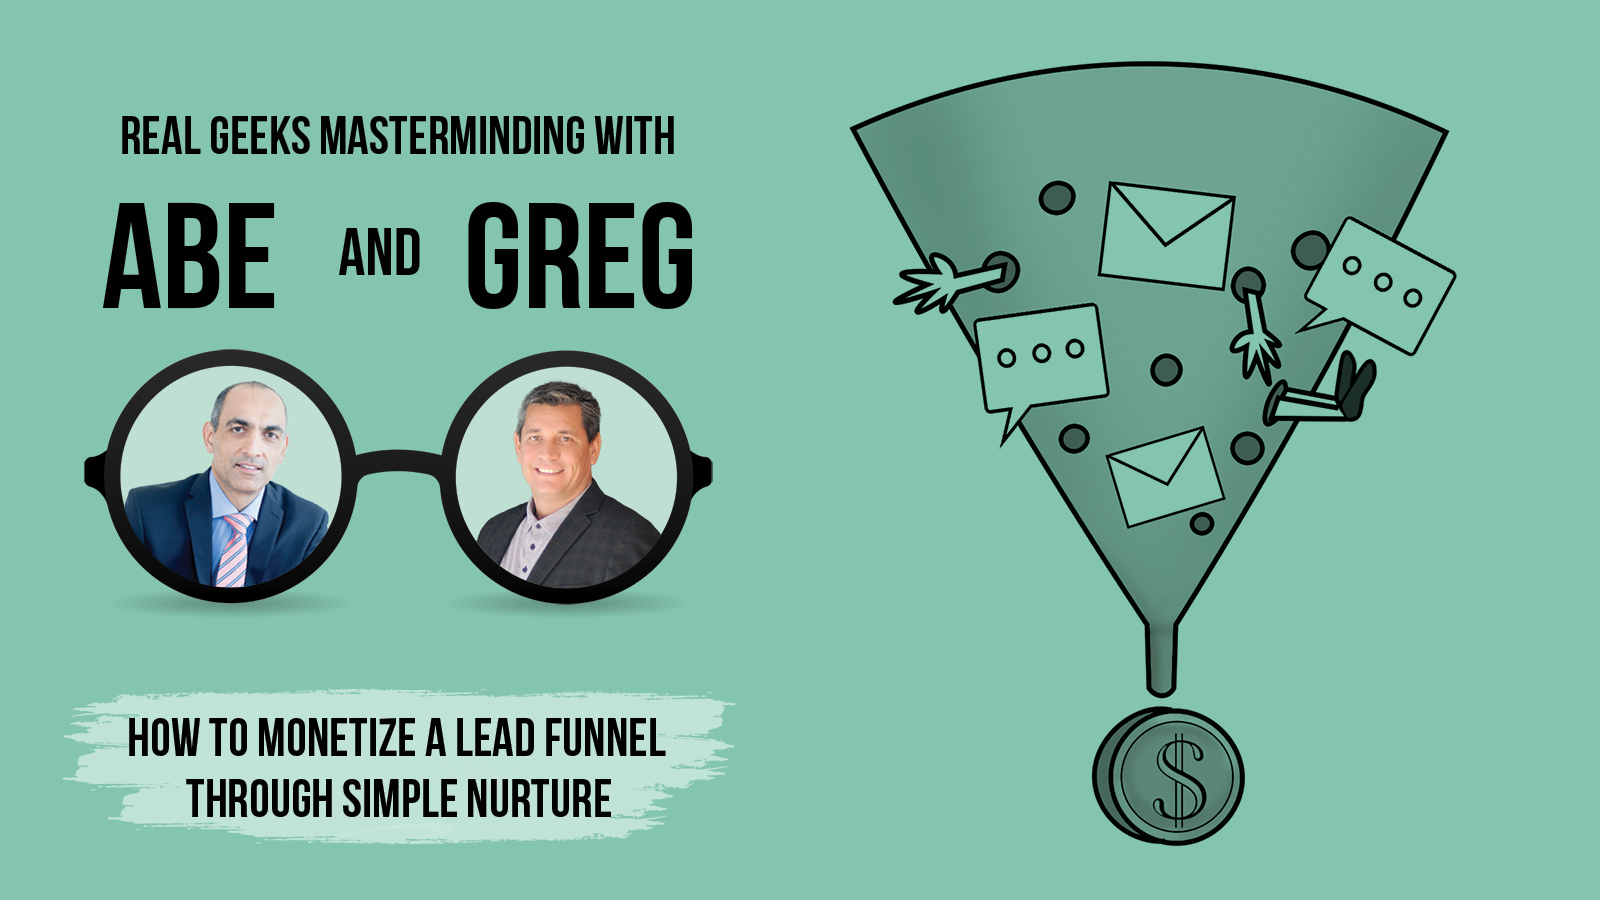 How To Monetize a Lead Funnel Through Simple Nurture